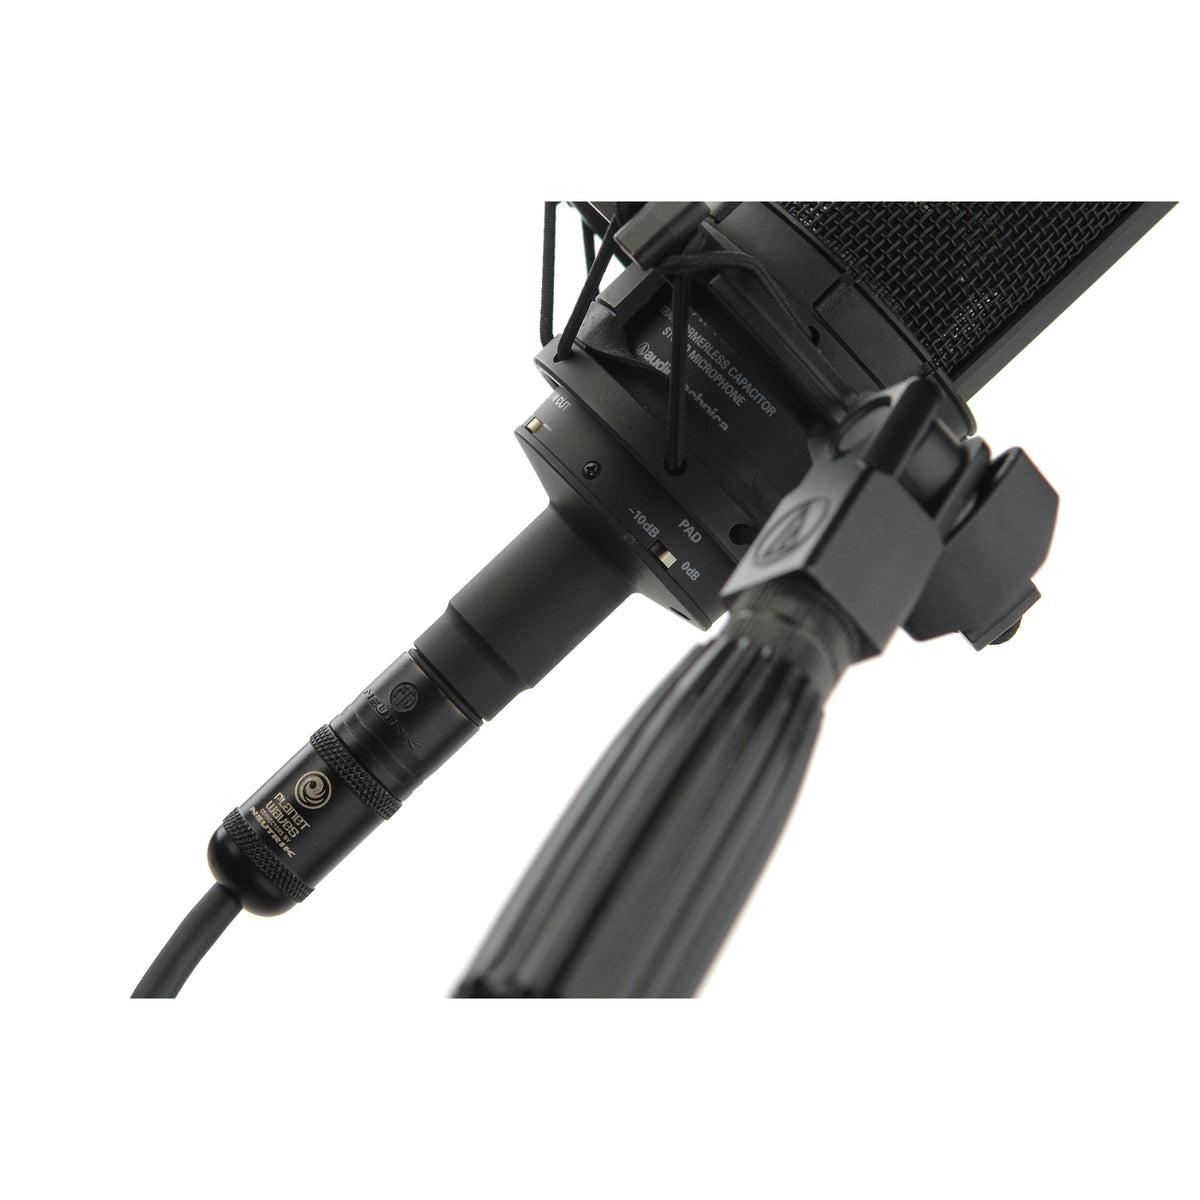 Planet Waves American Stage Series Microphone XLR Cable